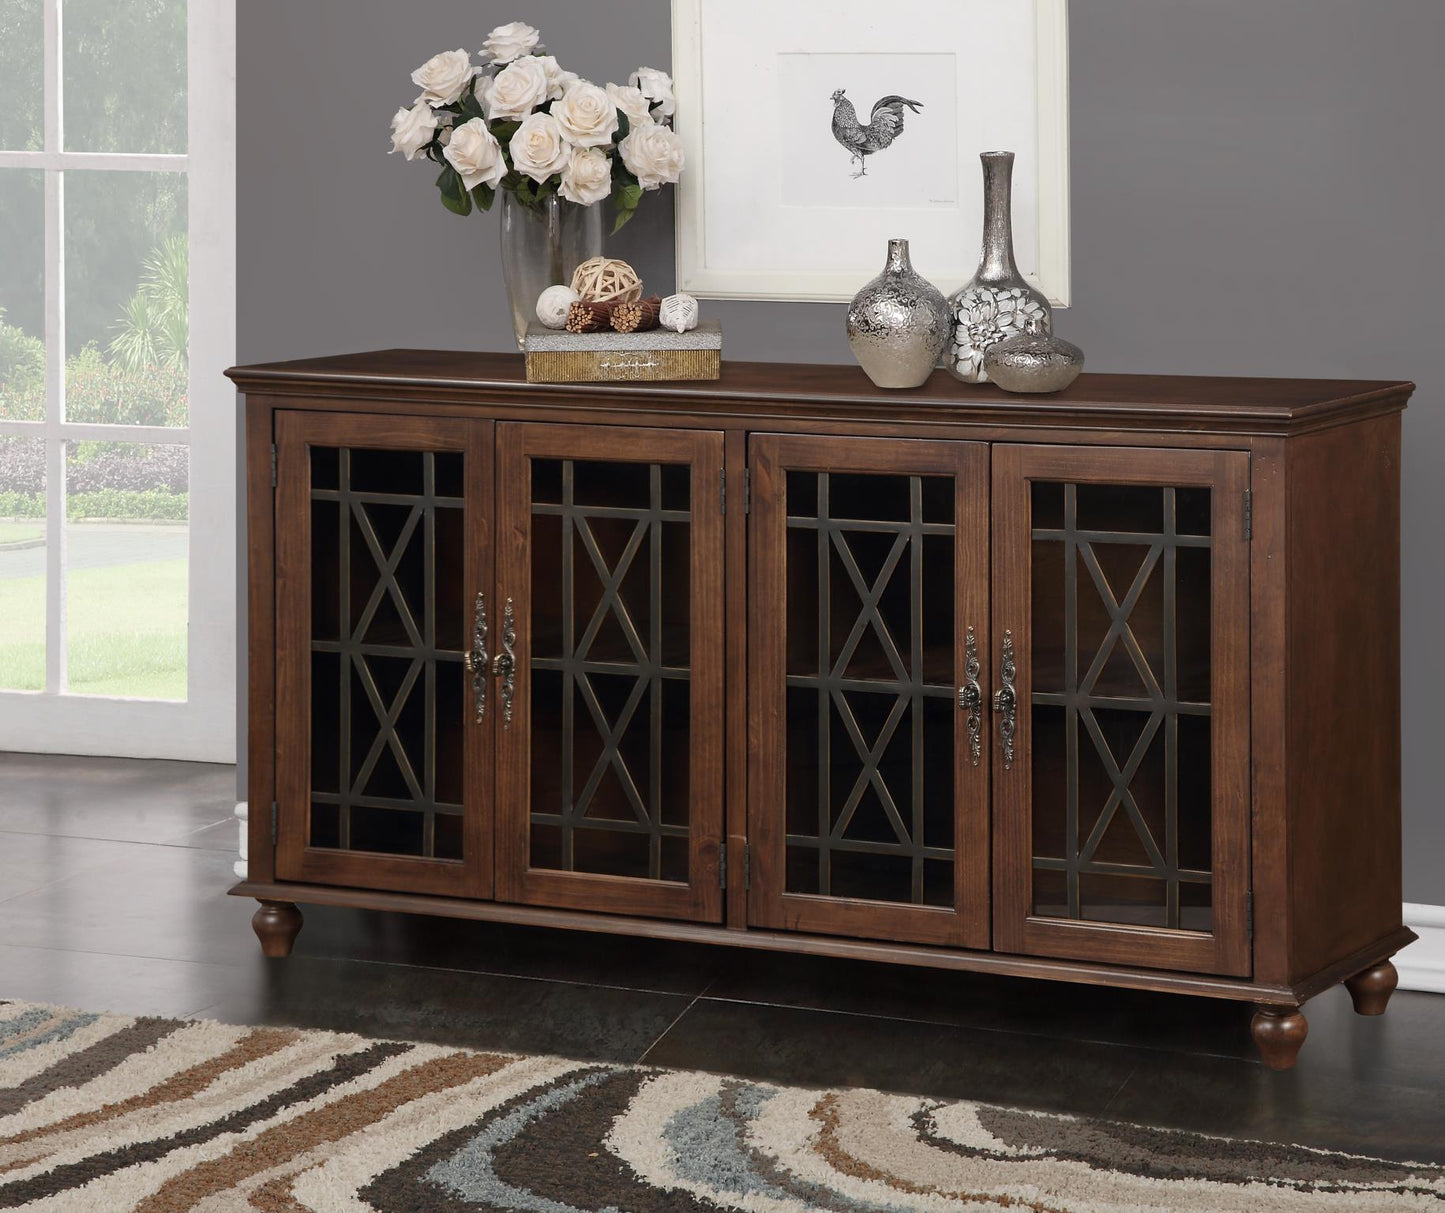 WEEKLY or MONTHLY. Rustic Midnight Harper's Accent Console